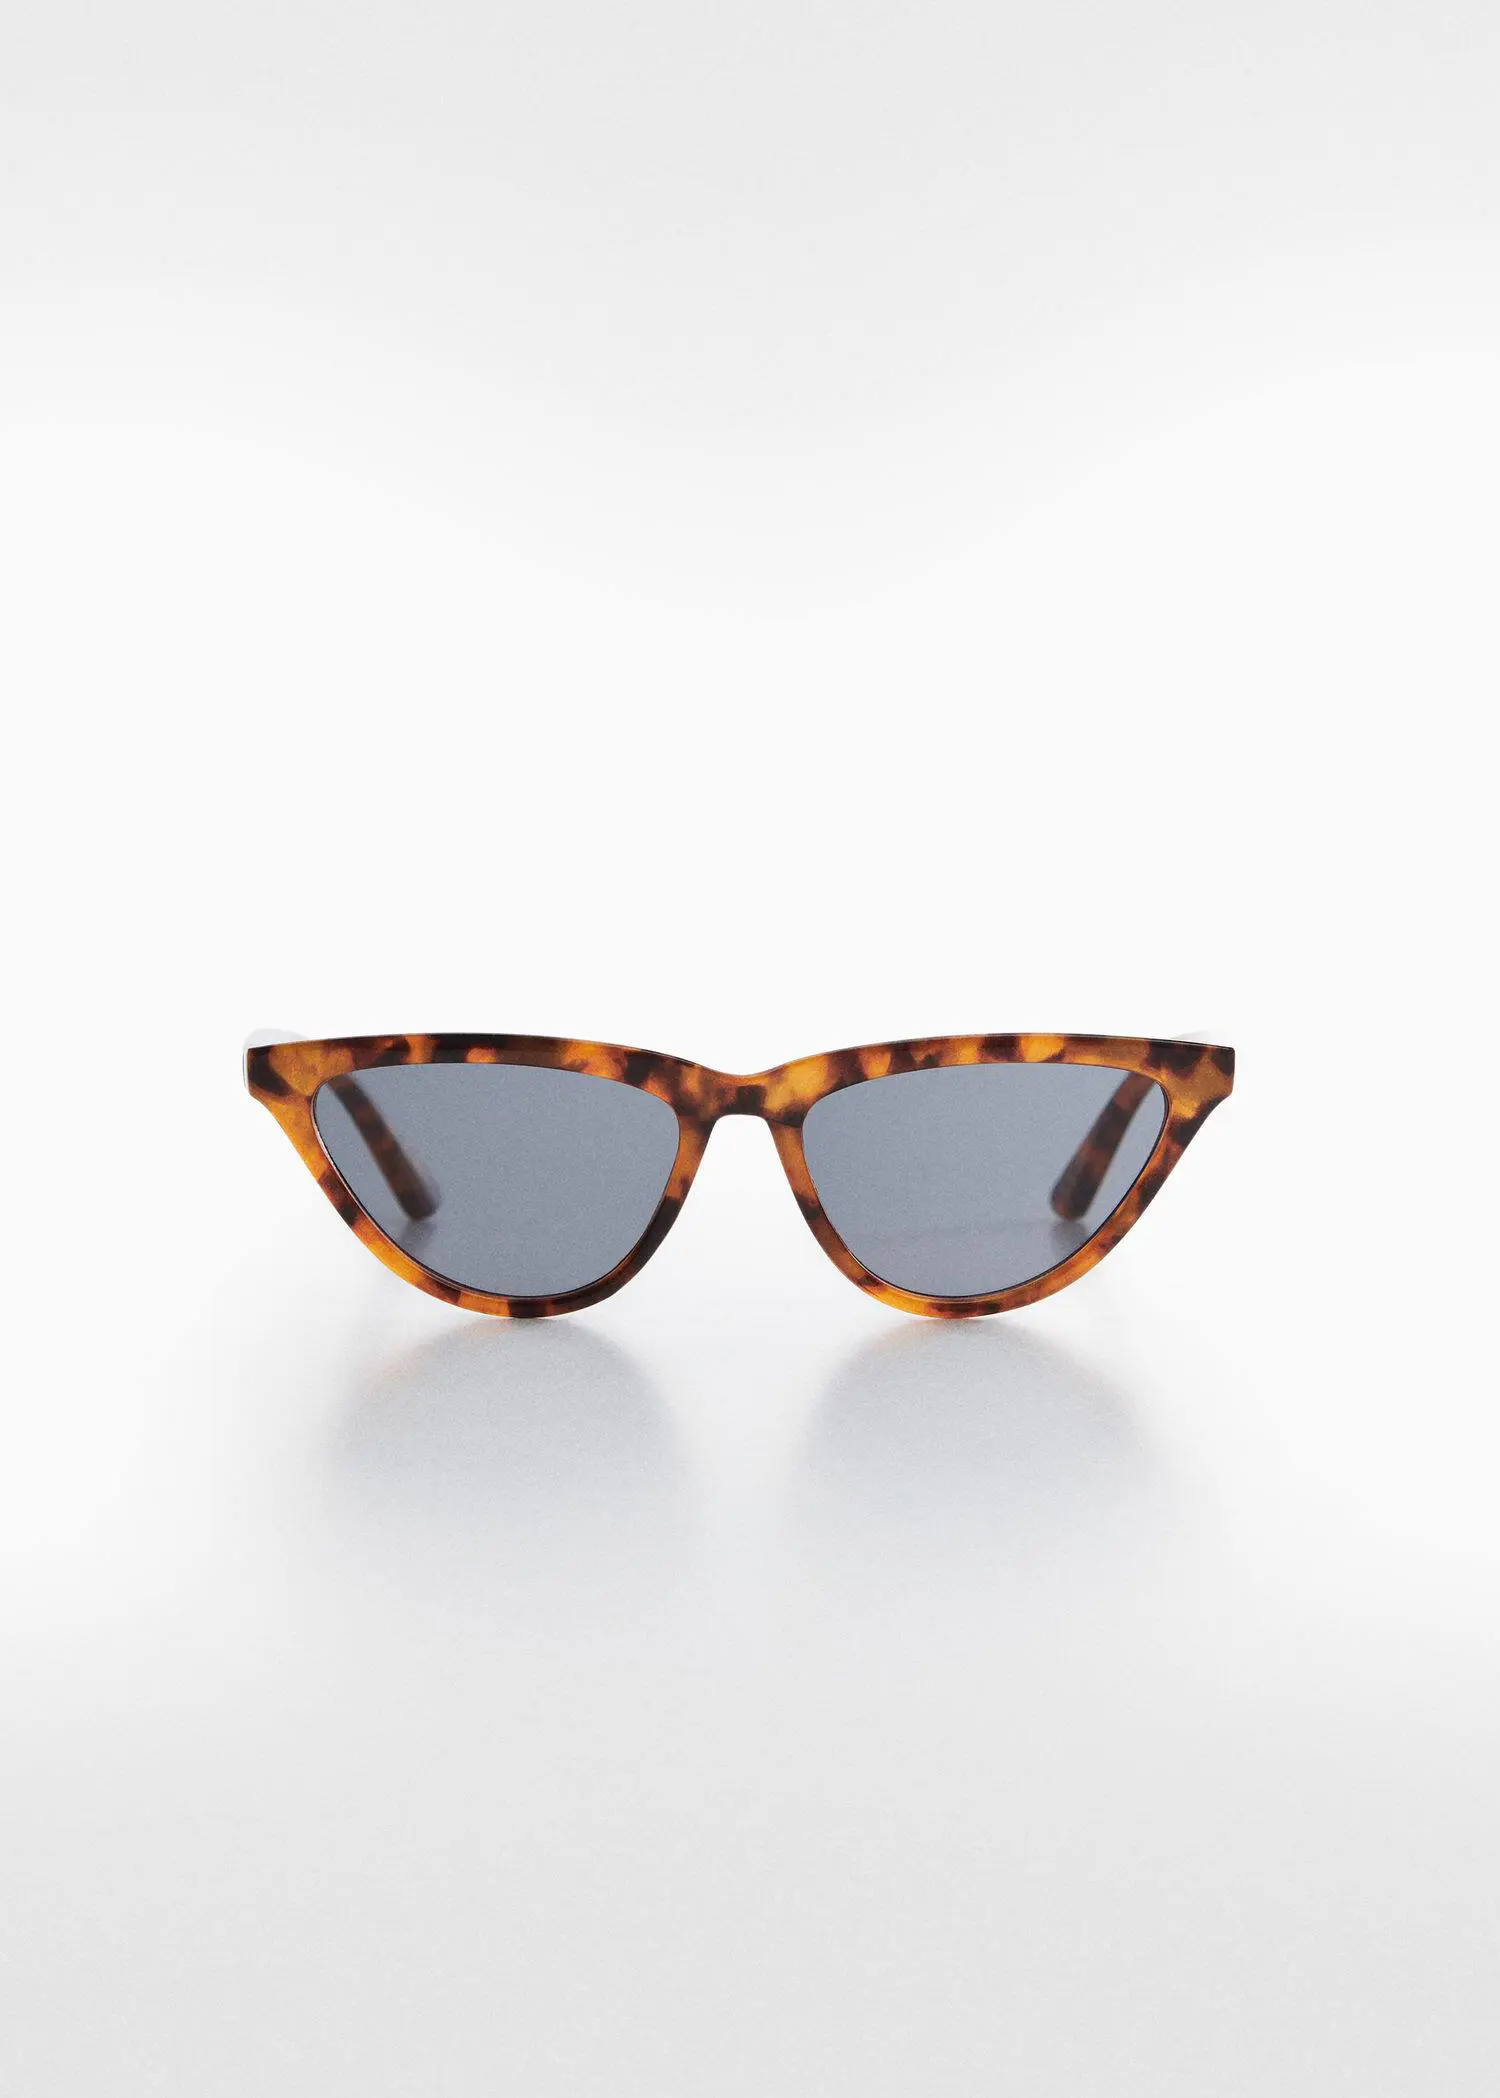 Mango Retro style sunglasses. a pair of cat eye sunglasses on top of a table. 